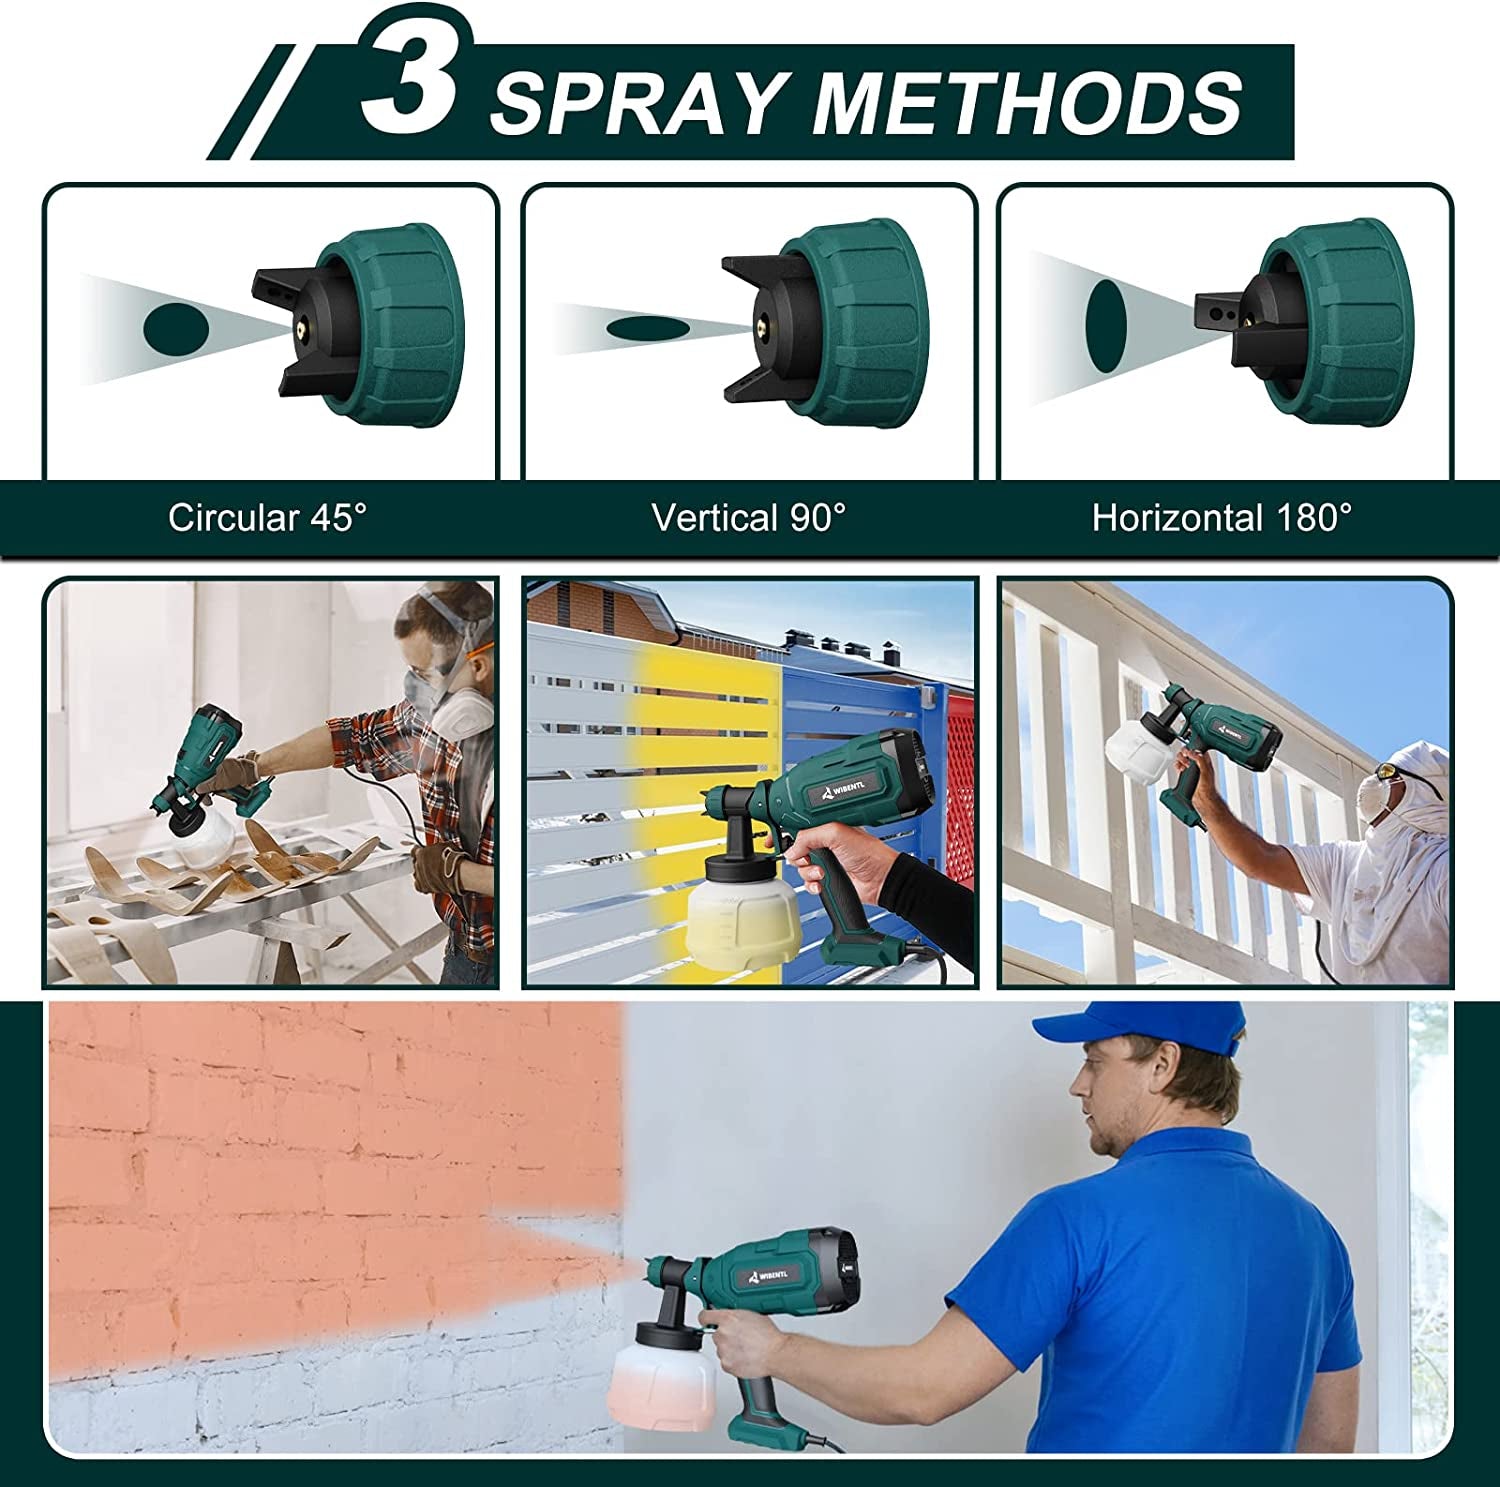 Paint Sprayer, 700W HVLP Electric Spray Paint Gun, with 6 Copper Nozzles & 3 Patterns, Paint Sprayers for Home Interior and Exterior, Furniture, Fence, Walls, DIY Works, Ceiling WSG10A